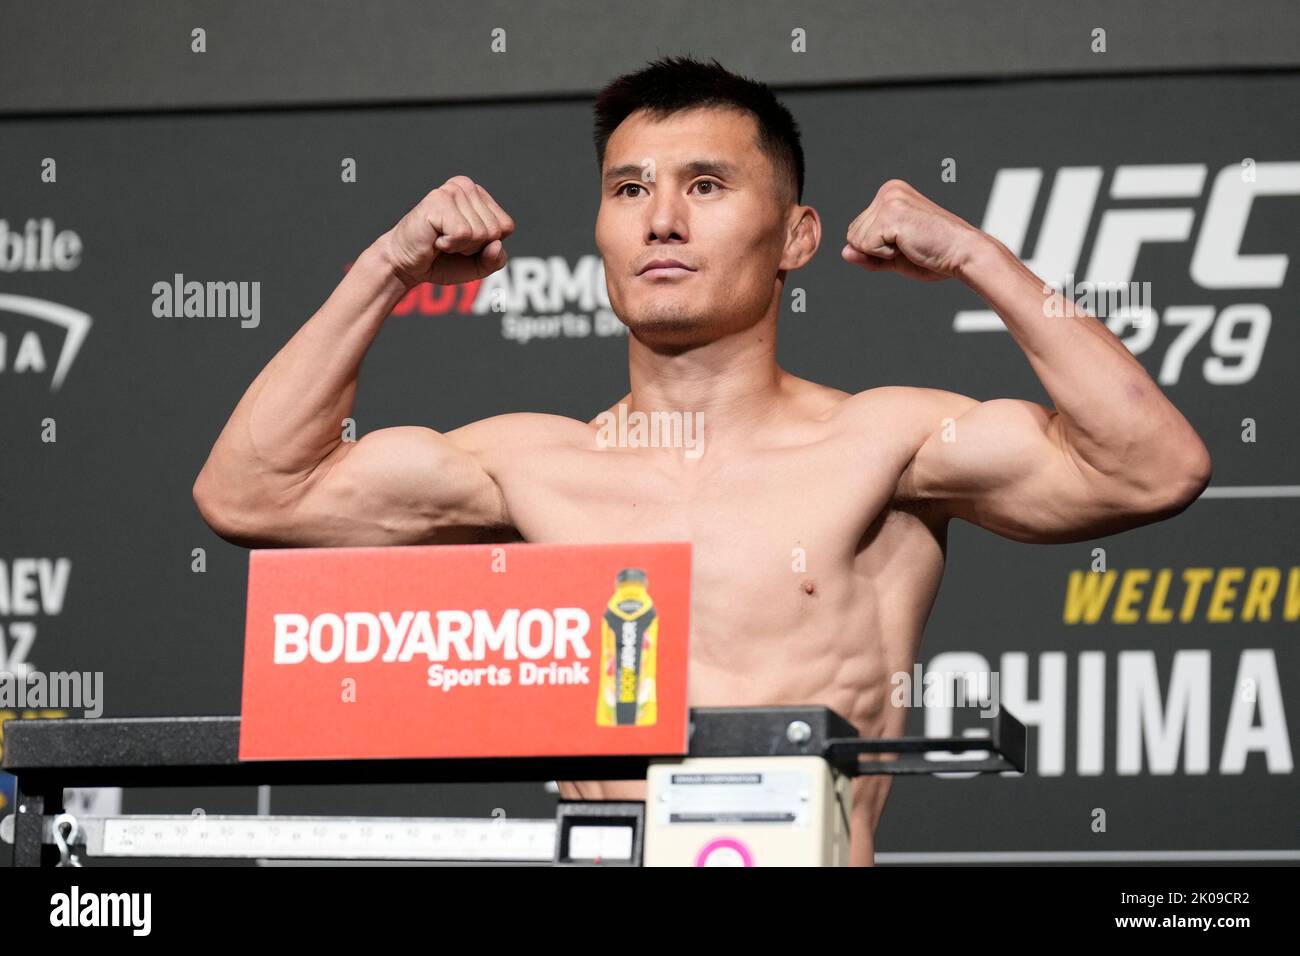 LAS VEGAS, NV - September 9: Alateng Heili  steps on the scale for the official weigh-ins at MGM Grand Garden Arena for UFC 279 - Chimaev vs Diaz - Official Weigh-in on September 9, 2022 in Las Vegas, NV, United States. (Photo by Louis Grasse/PxImages) Stock Photo